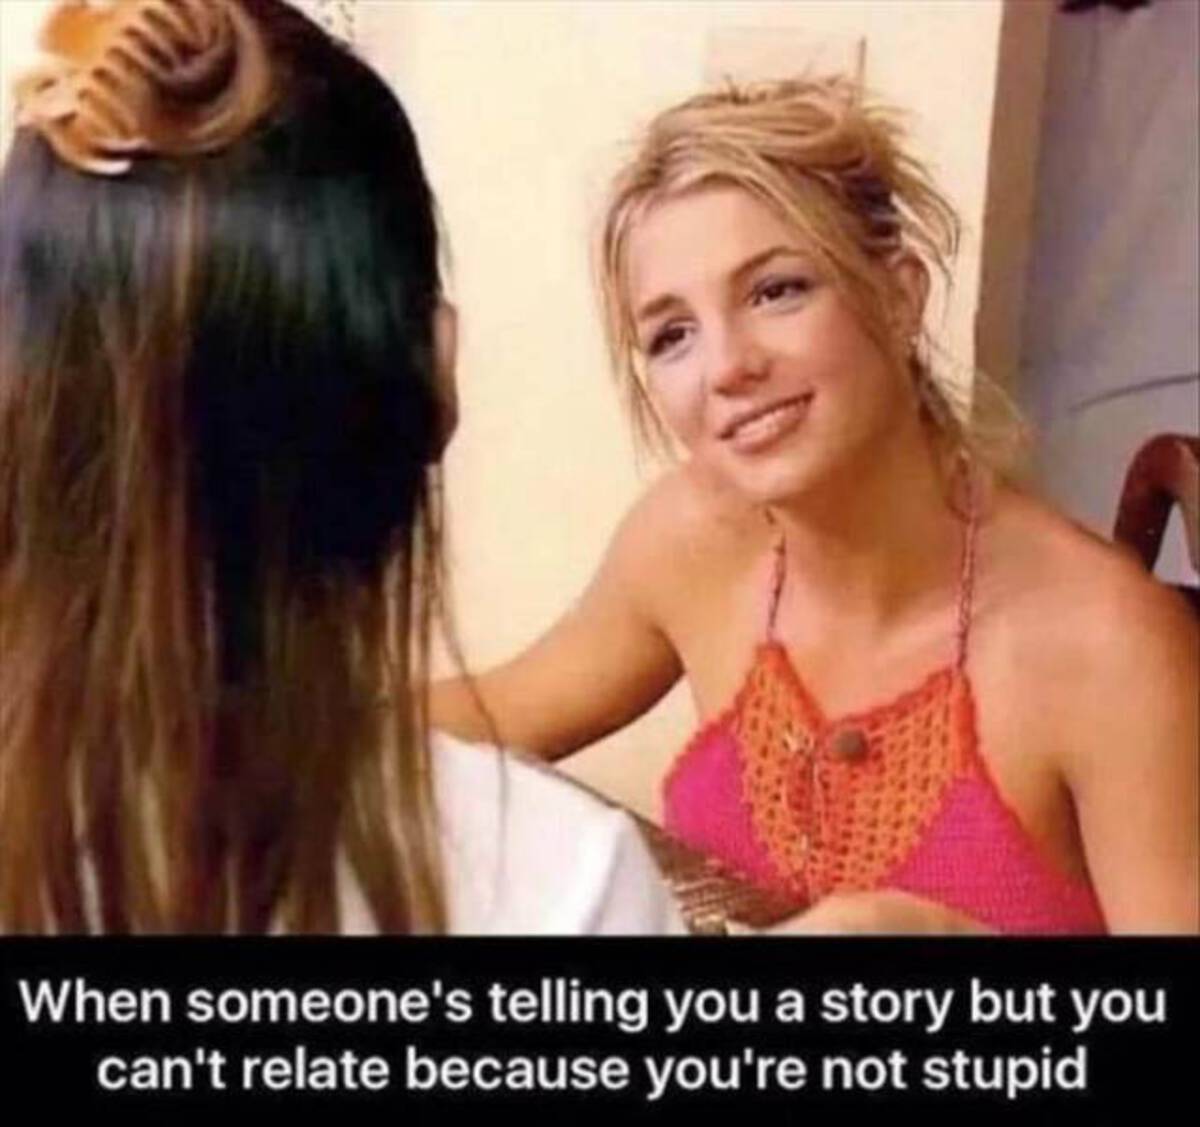 britney spears meme - When someone's telling you a story but you can't relate because you're not stupid